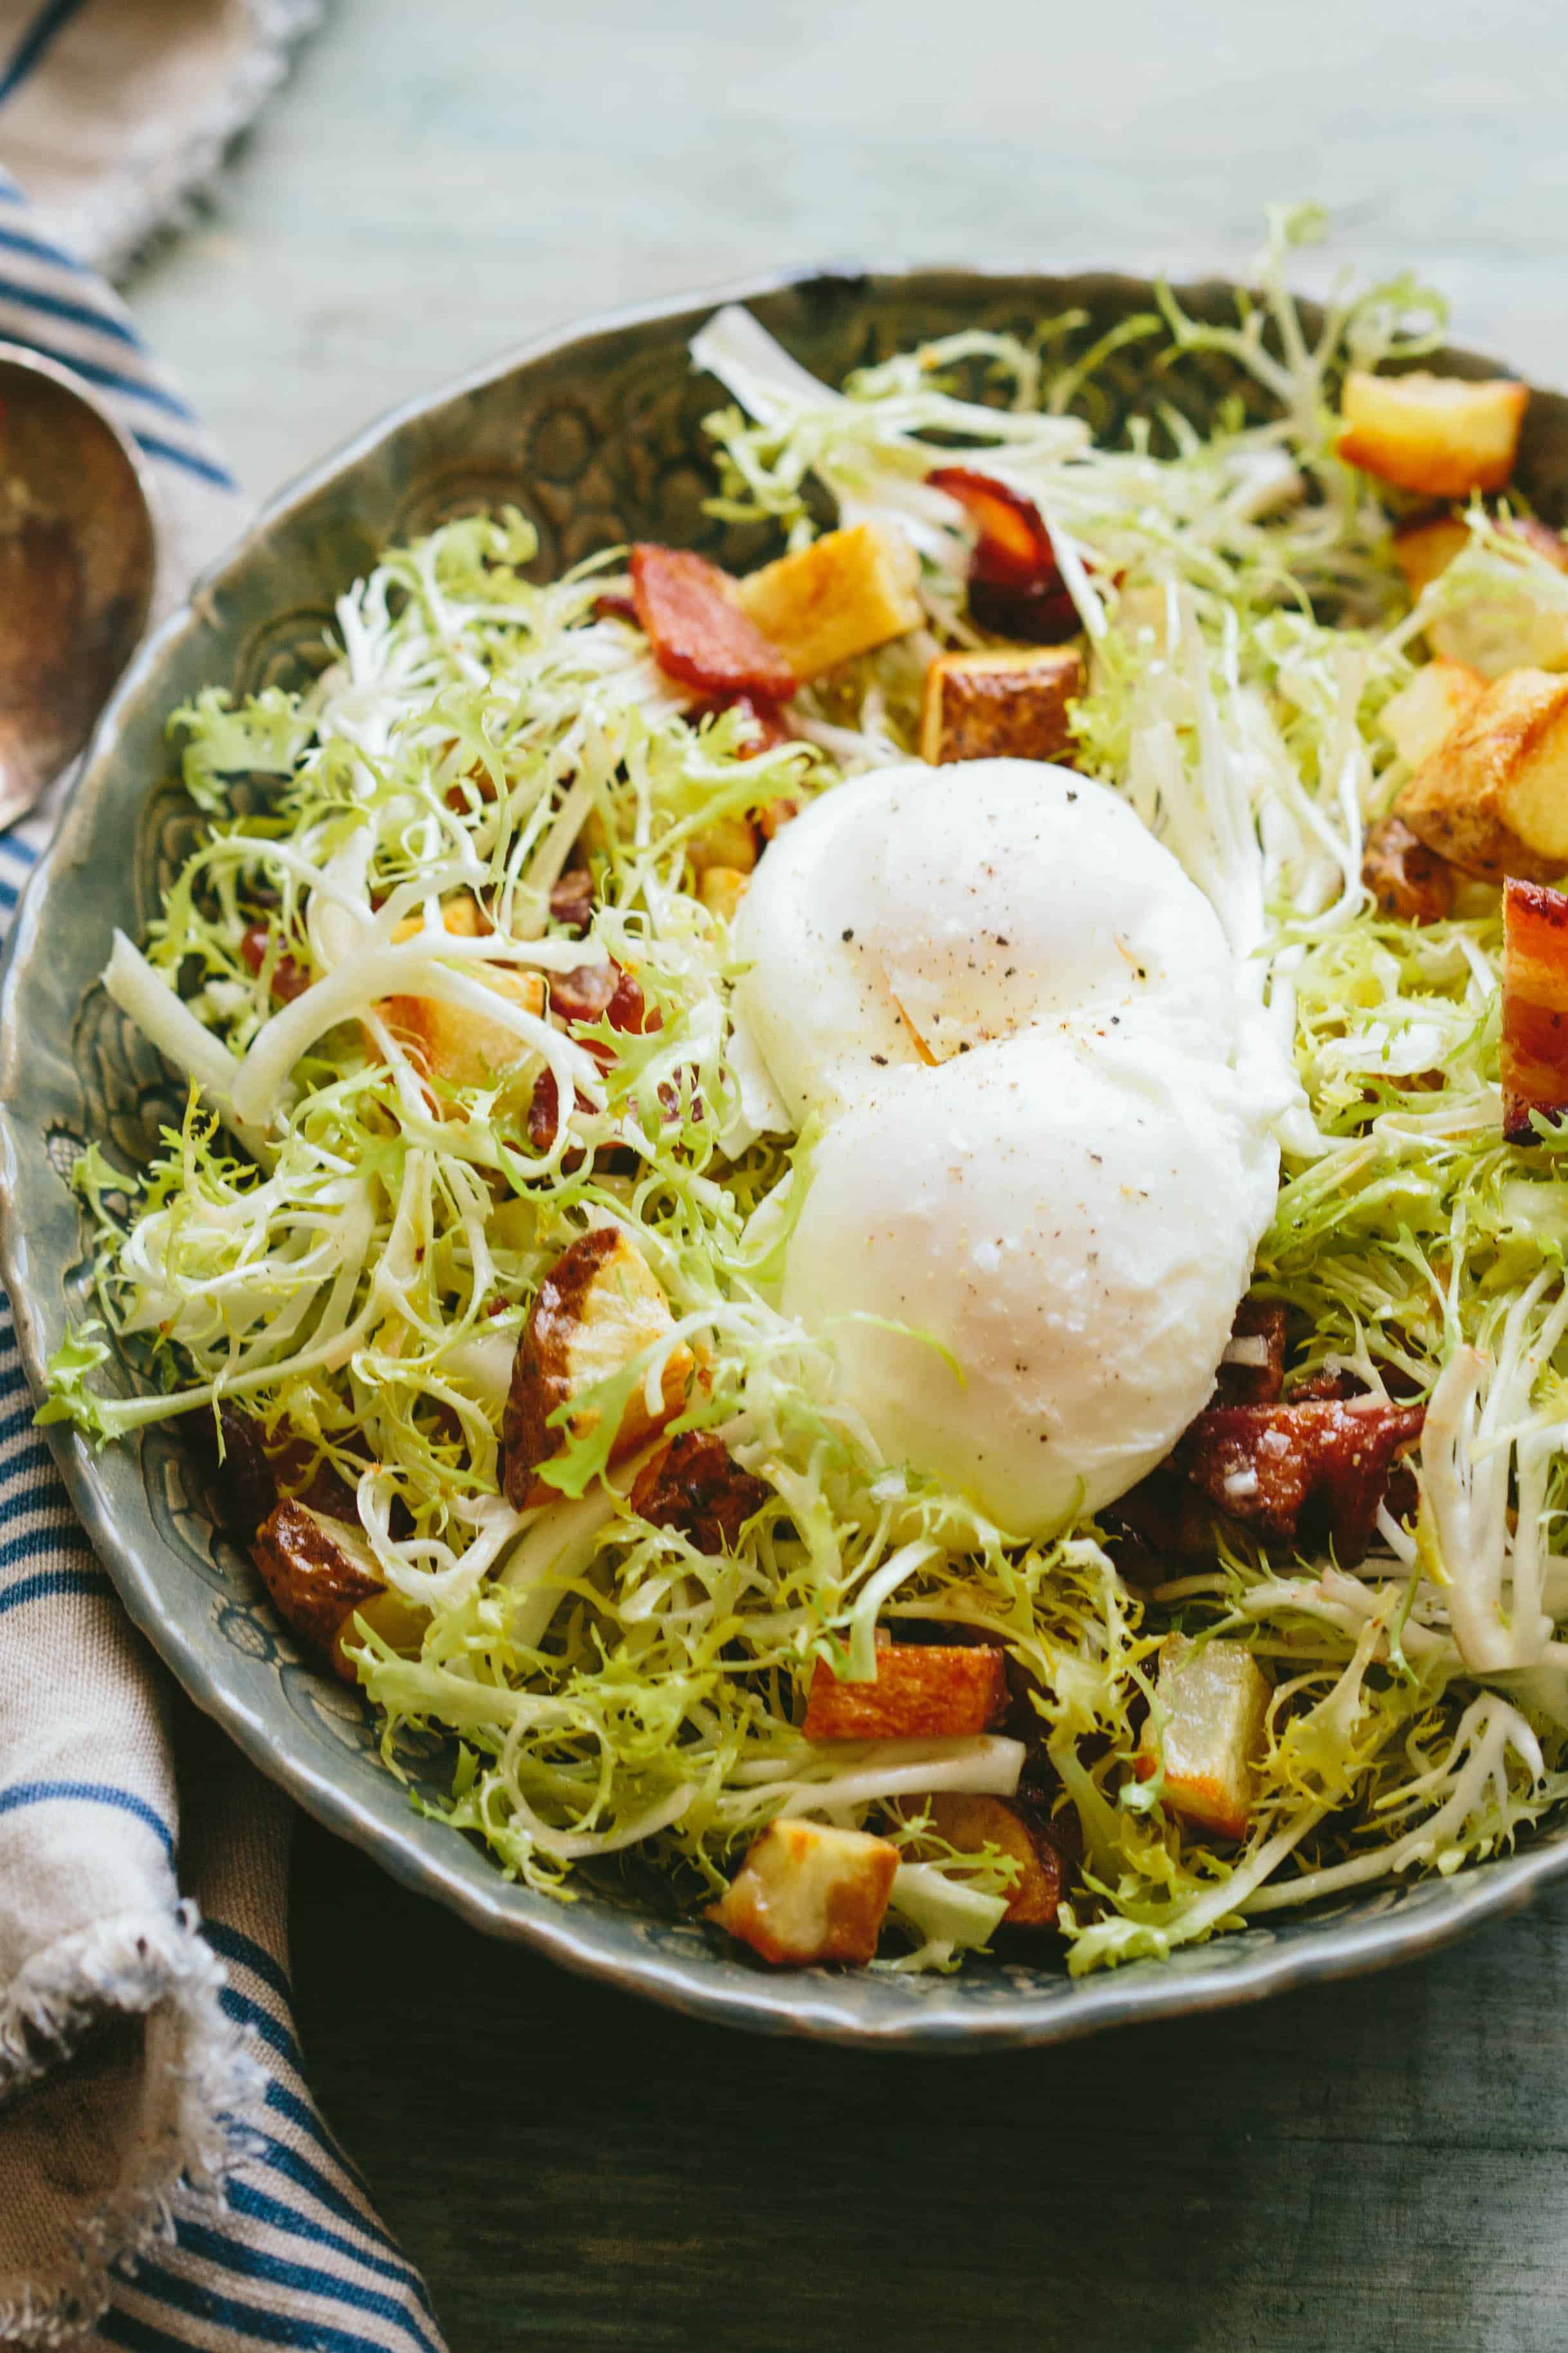 Top view of a serving bowl of lyonnaise salad with poached eggs on top.